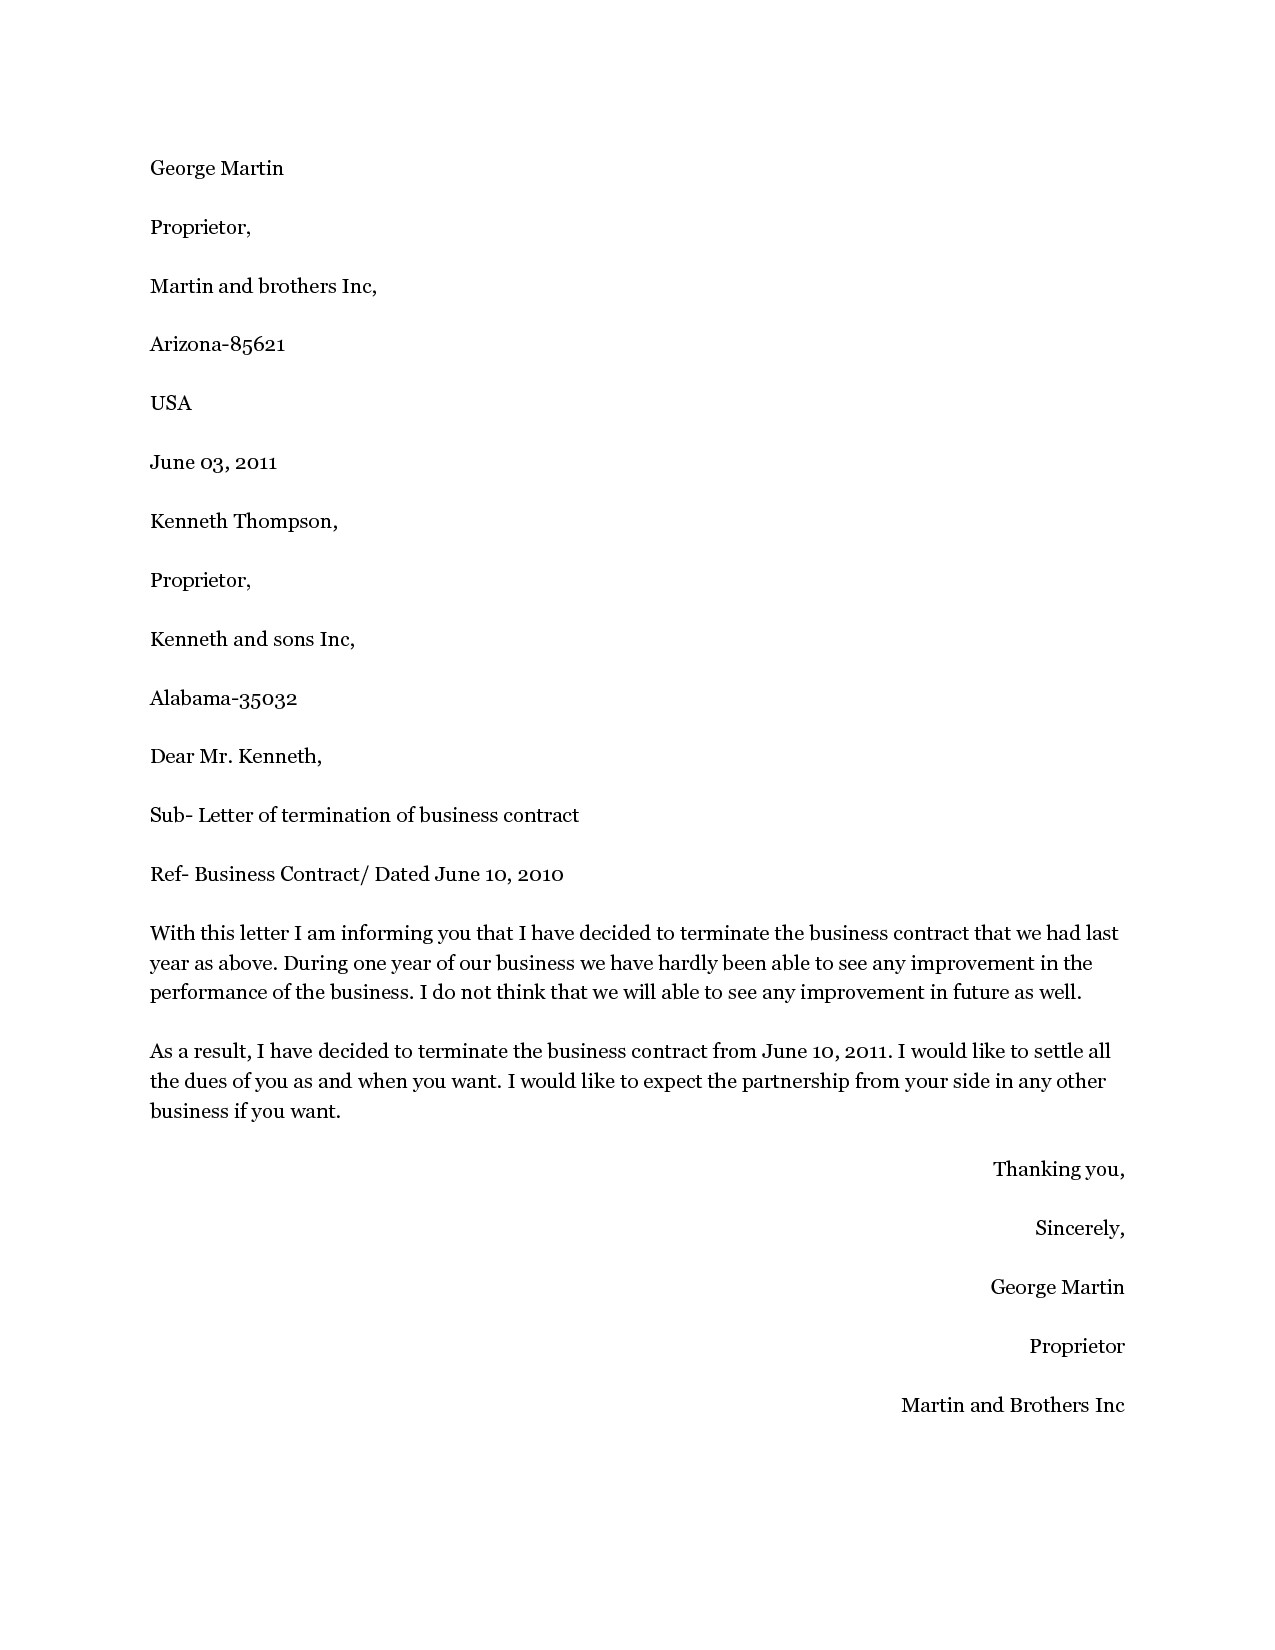 Dismissal Letter Template - Cancellation Contract Luxury Contract Termination Letter for